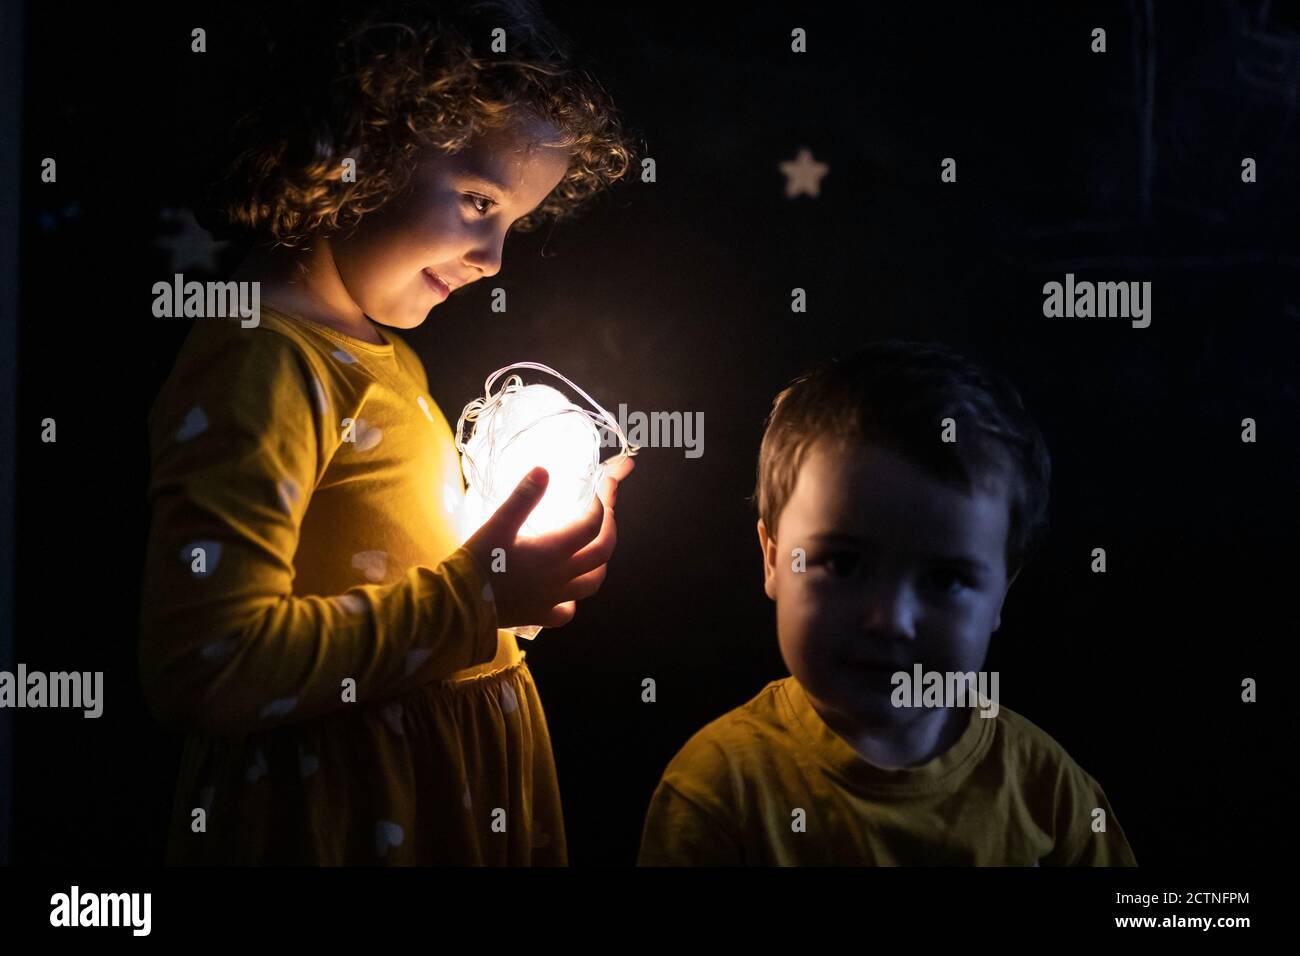 Side view of curious siblings in pajamas standing in dark room with illuminated garland Stock Photo